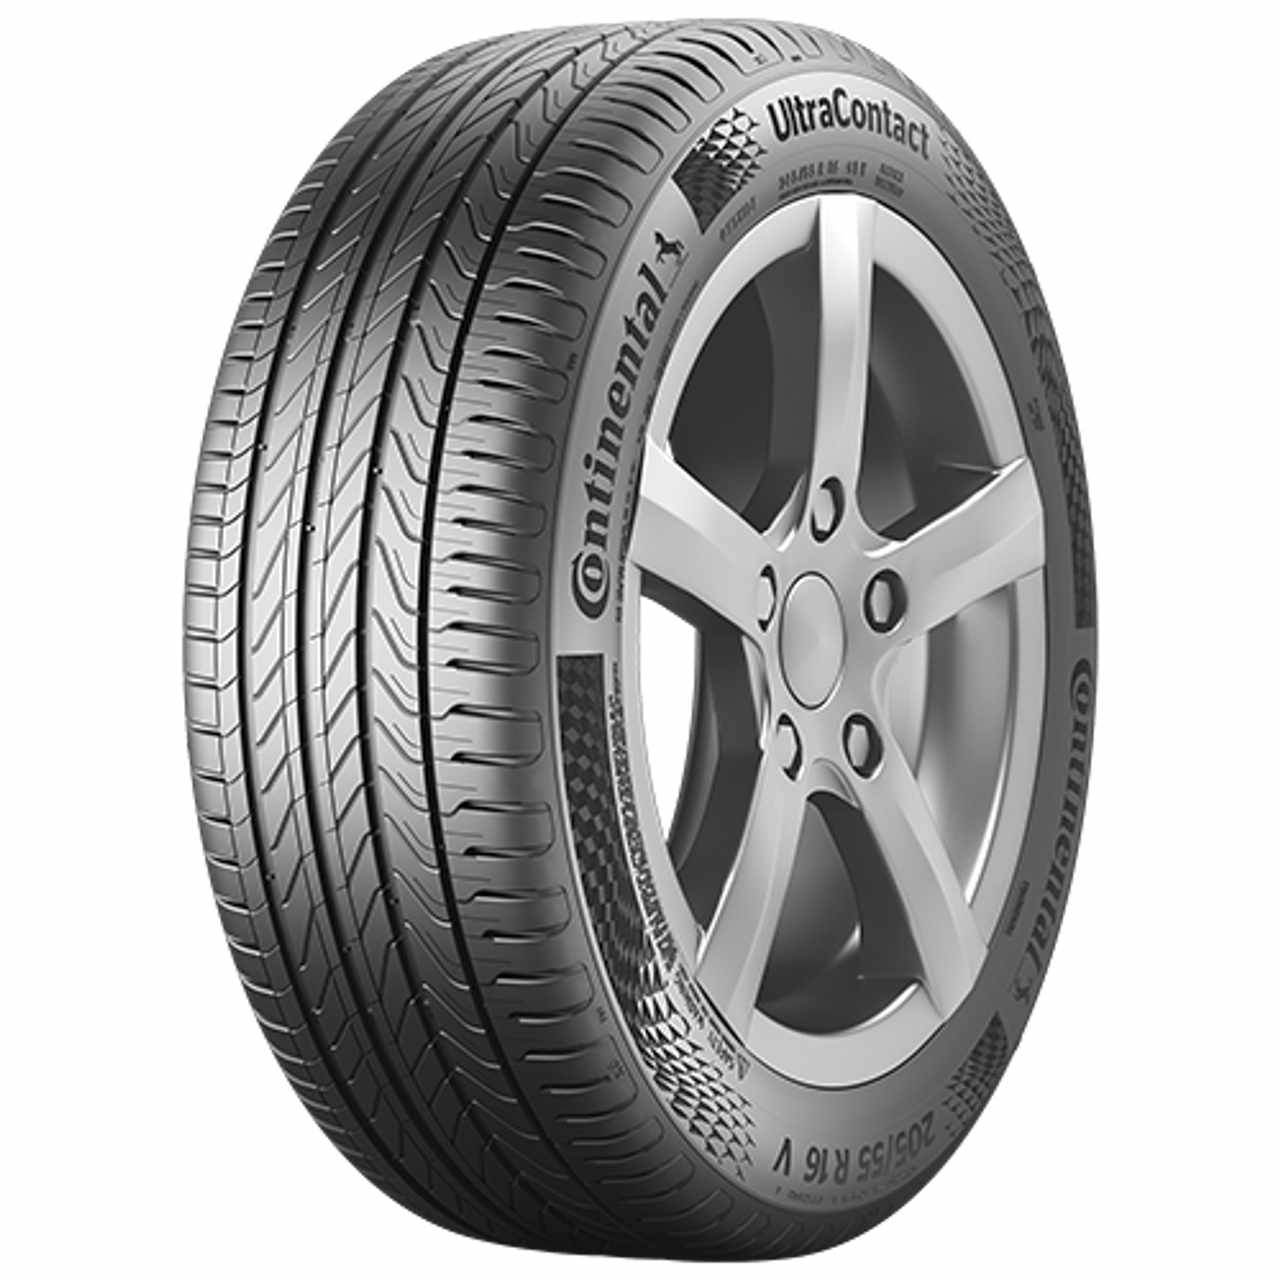 CONTINENTAL ULTRACONTACT (EVc) 175/60R19 86Q FR BSW